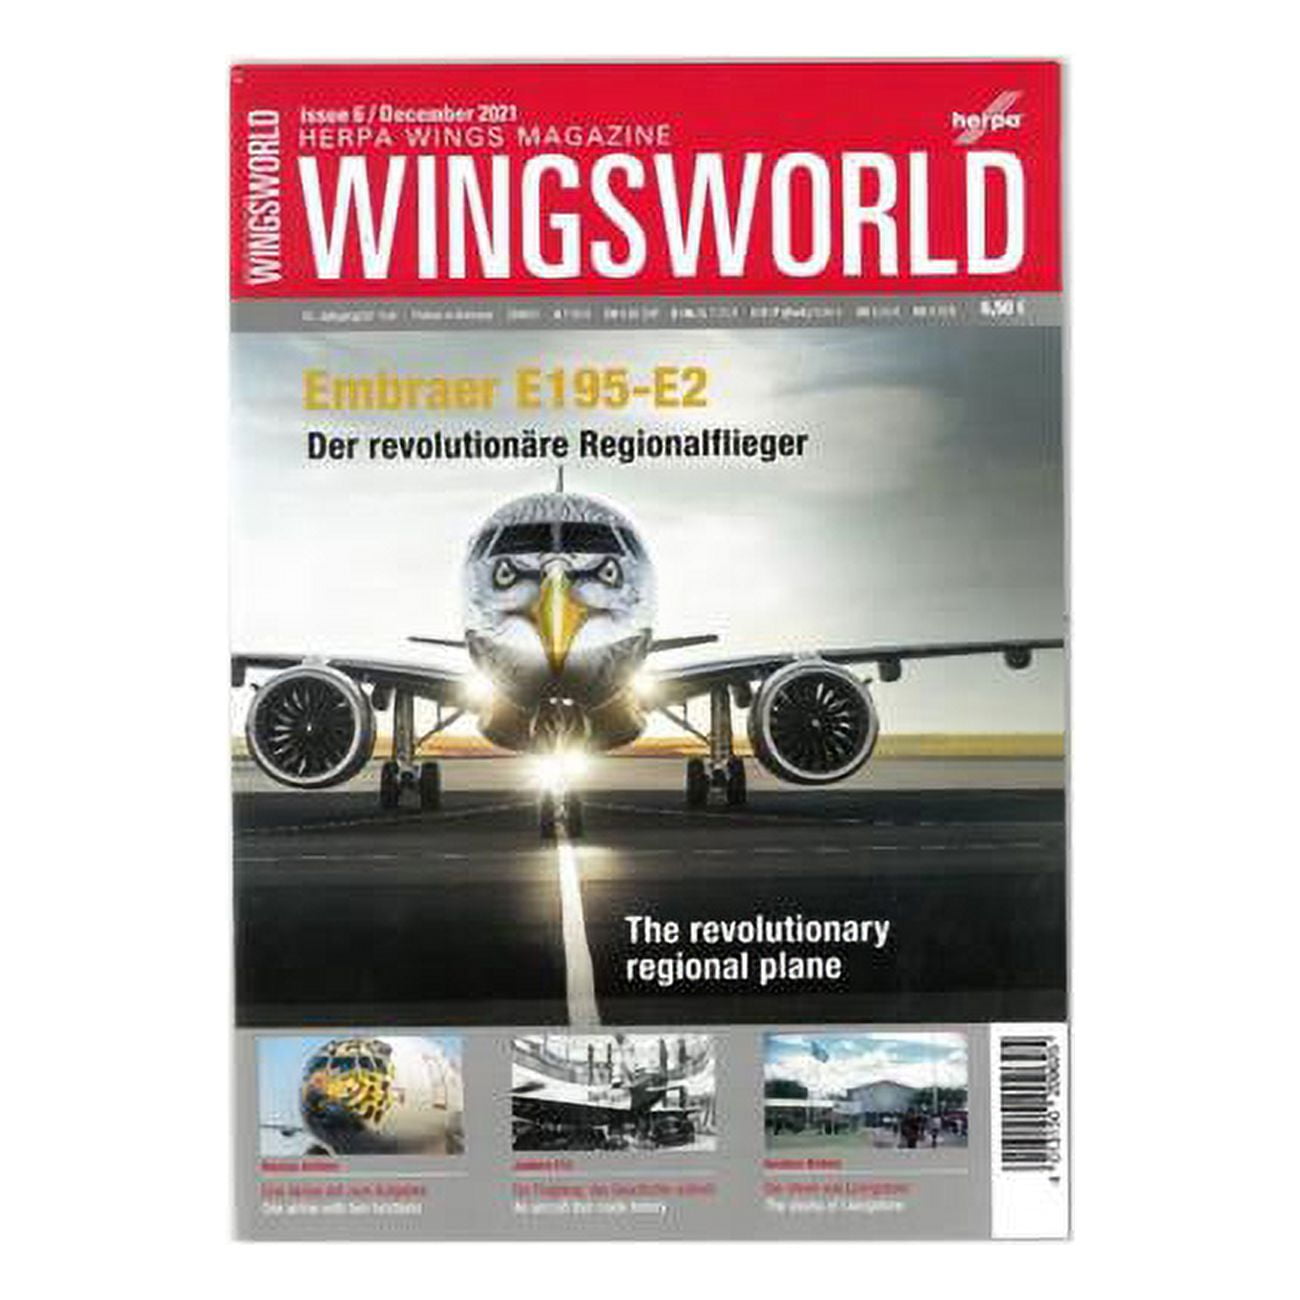 Picture of Herpa HE209625 Wingsworld Issue 6 - December 2021 Airlines Magazine